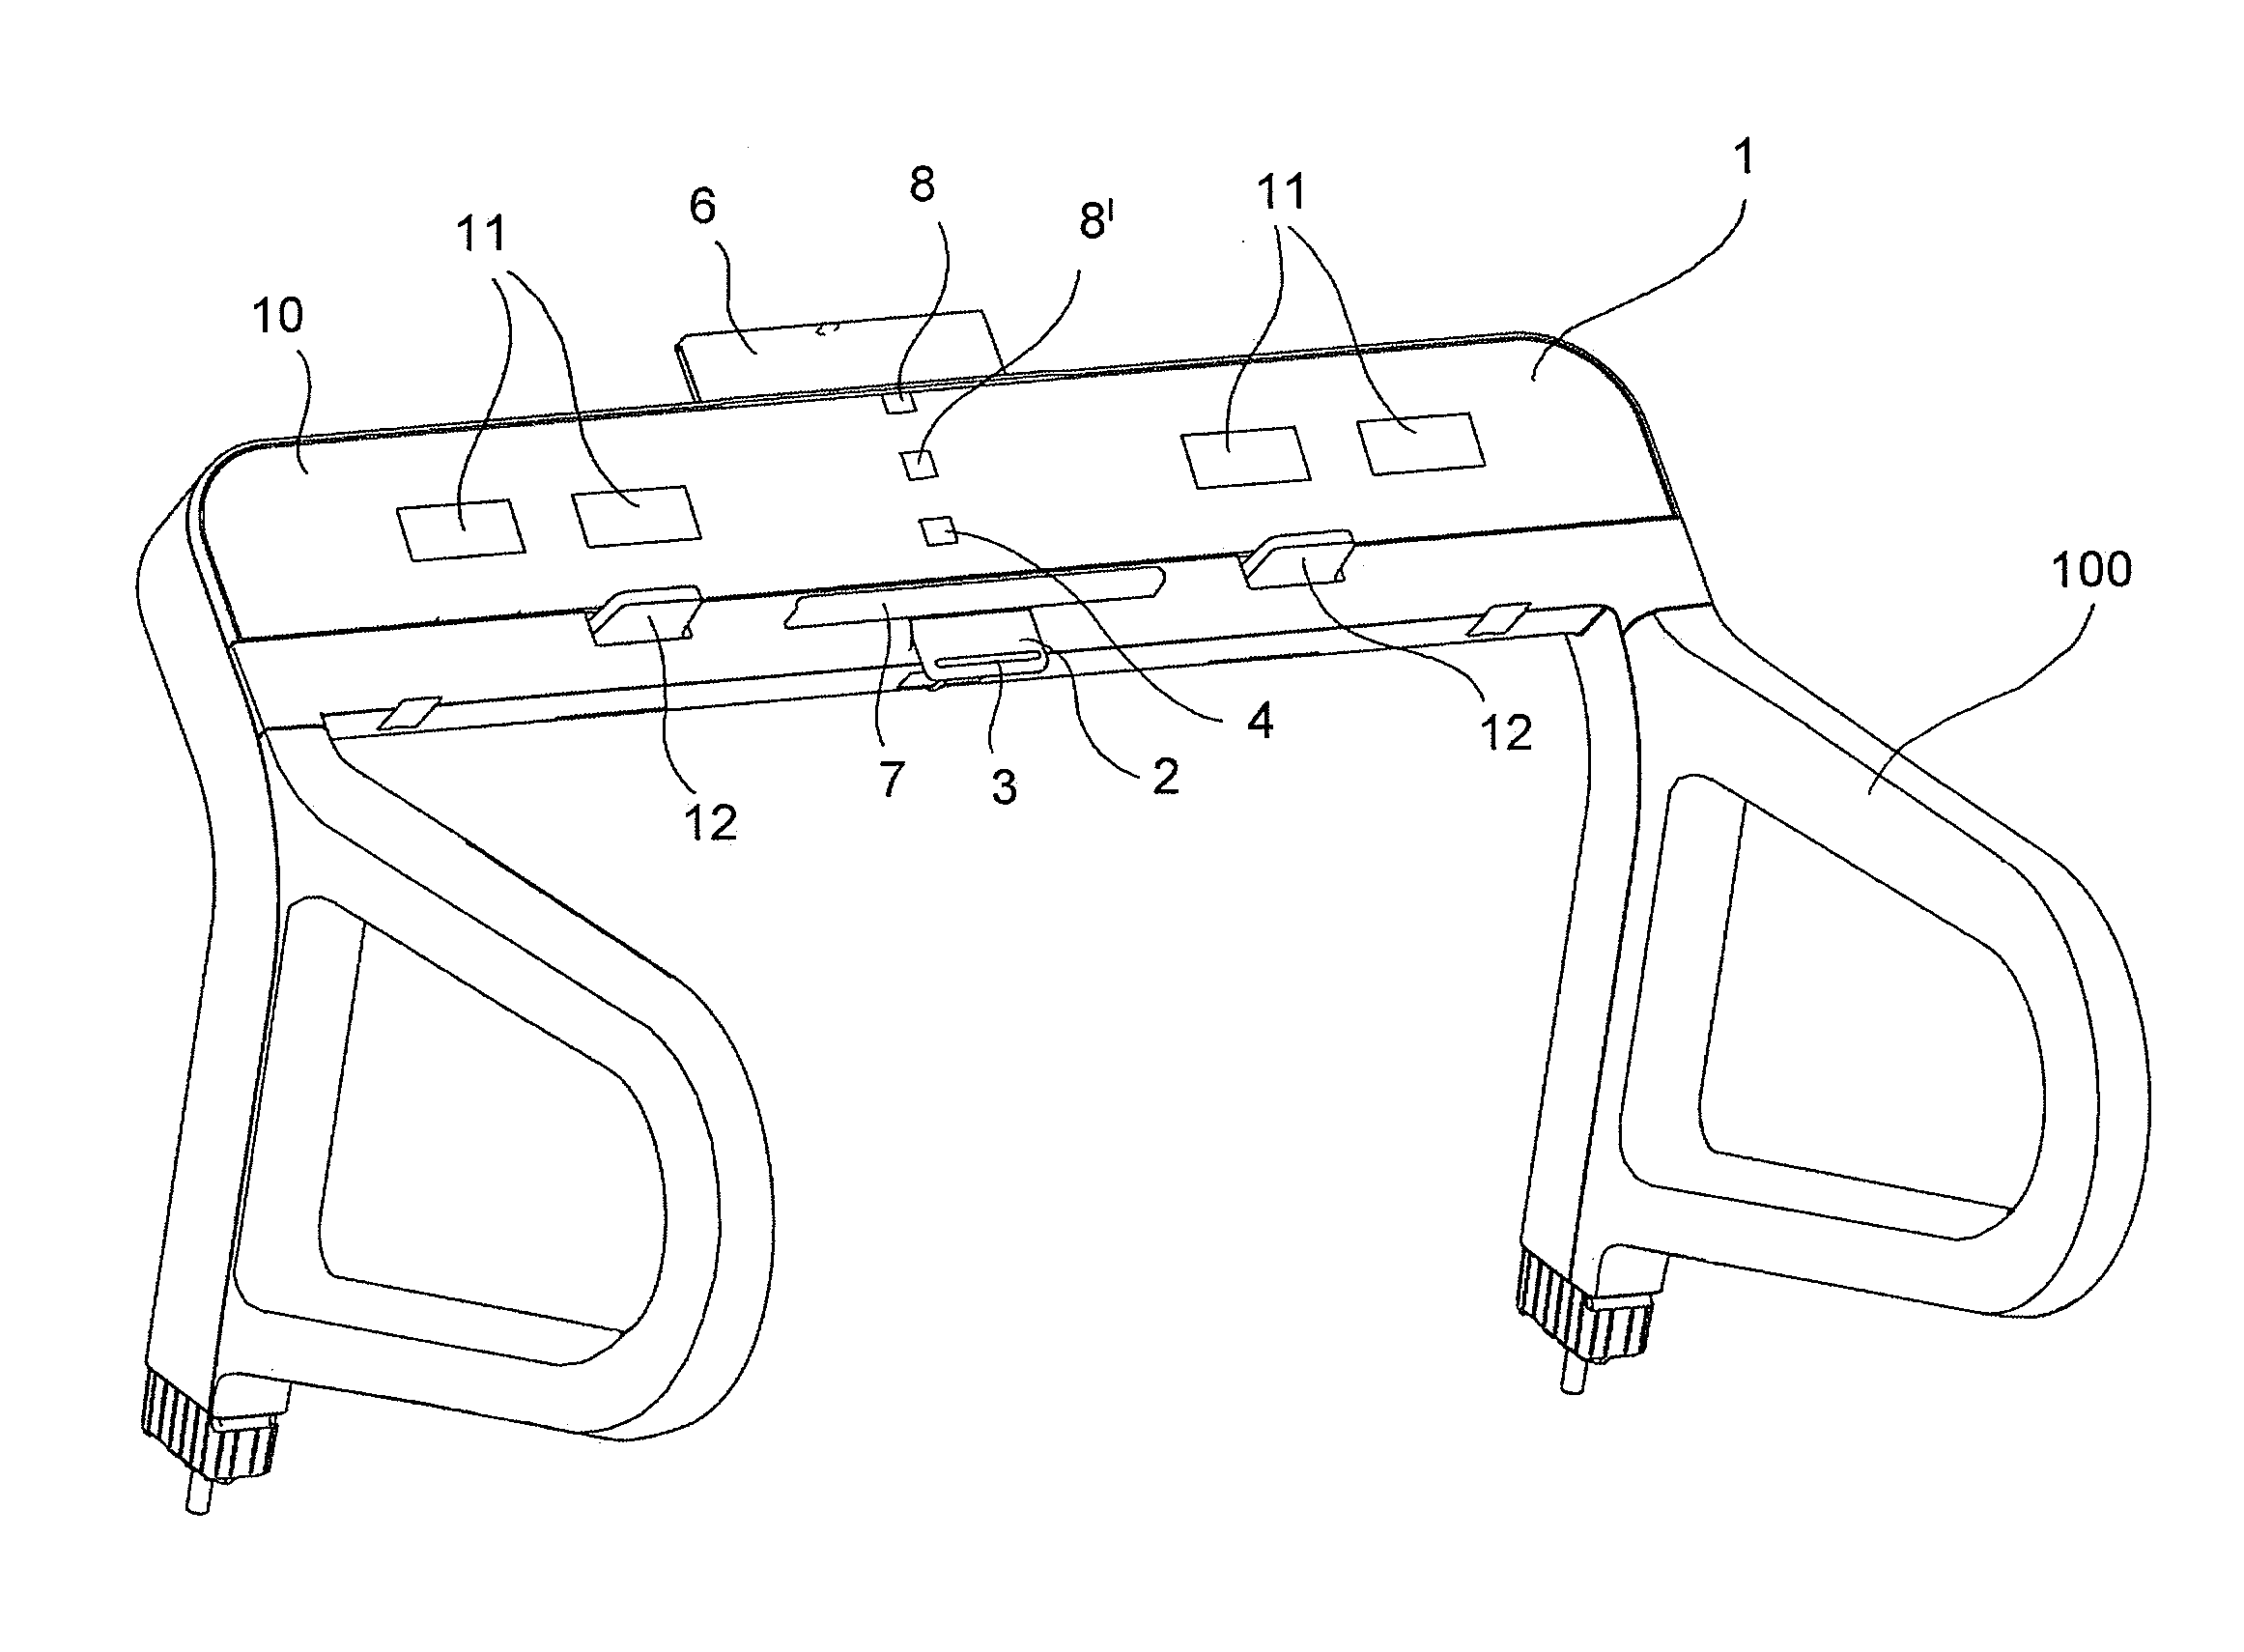 Control interface of an exercising machine suitable to assume operating modes